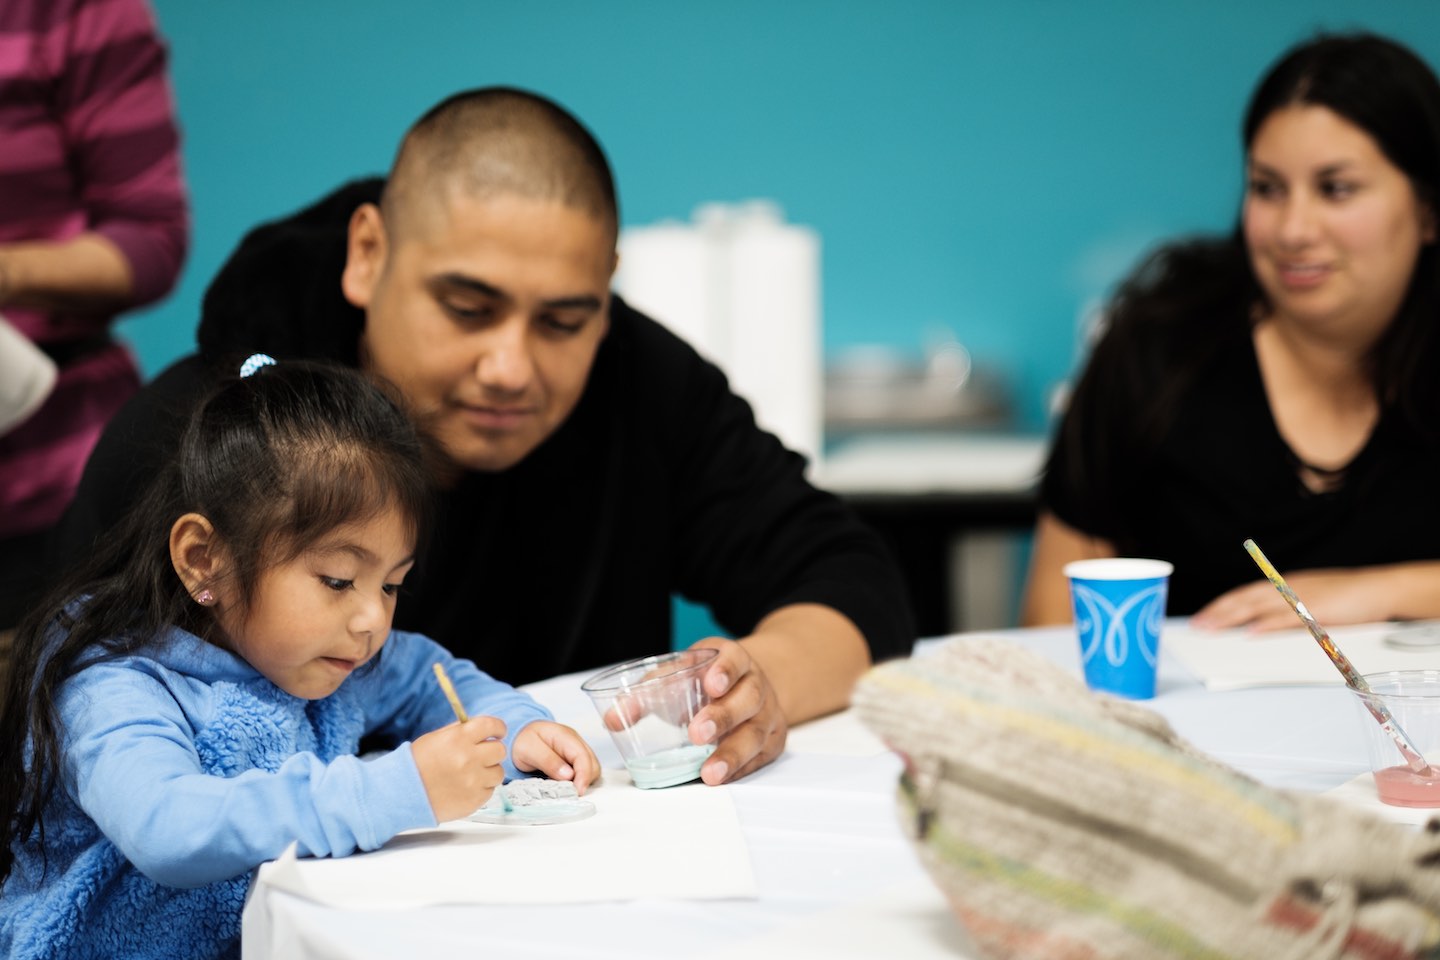 Latinx father and young daughter sit together while daughter paints, woman smiles and looks on in background